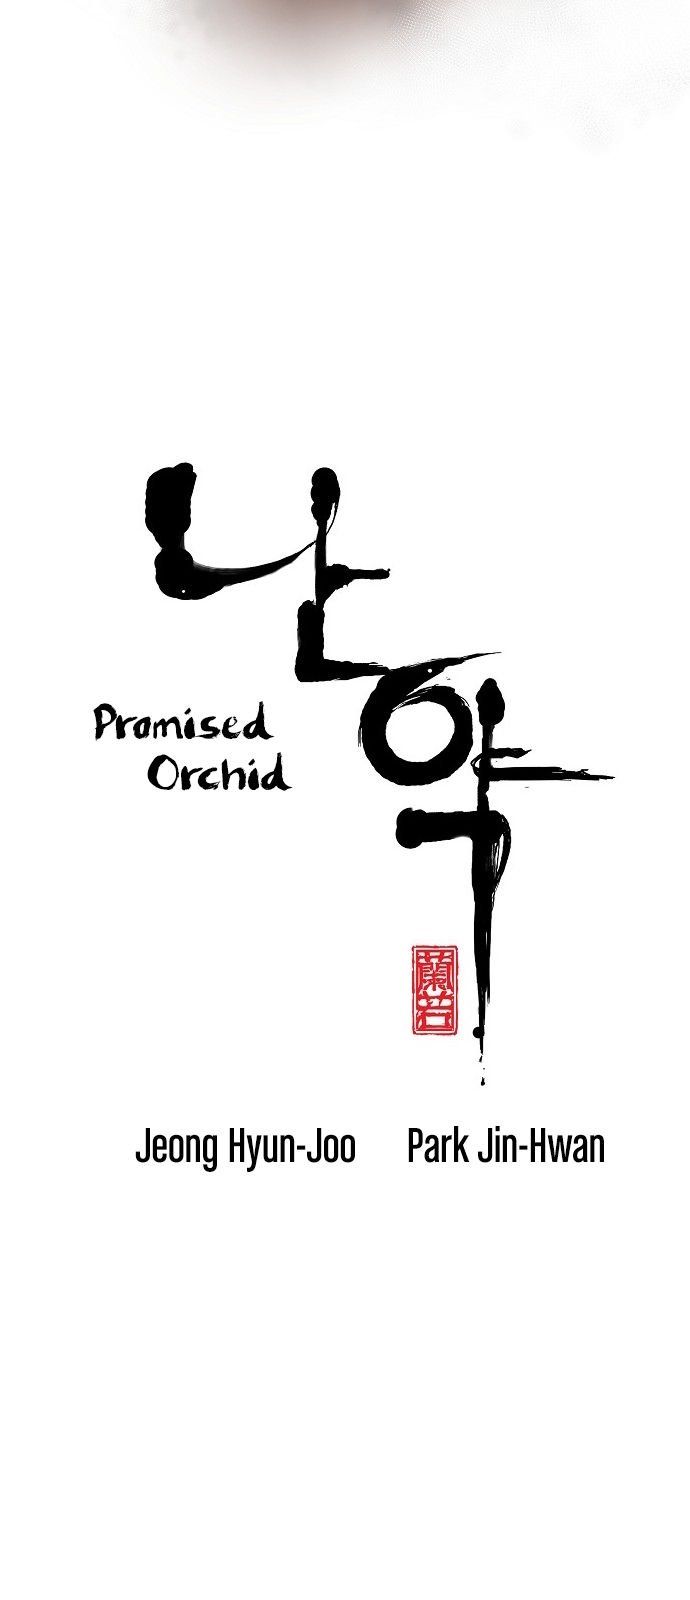 Promised Orchid 10 2